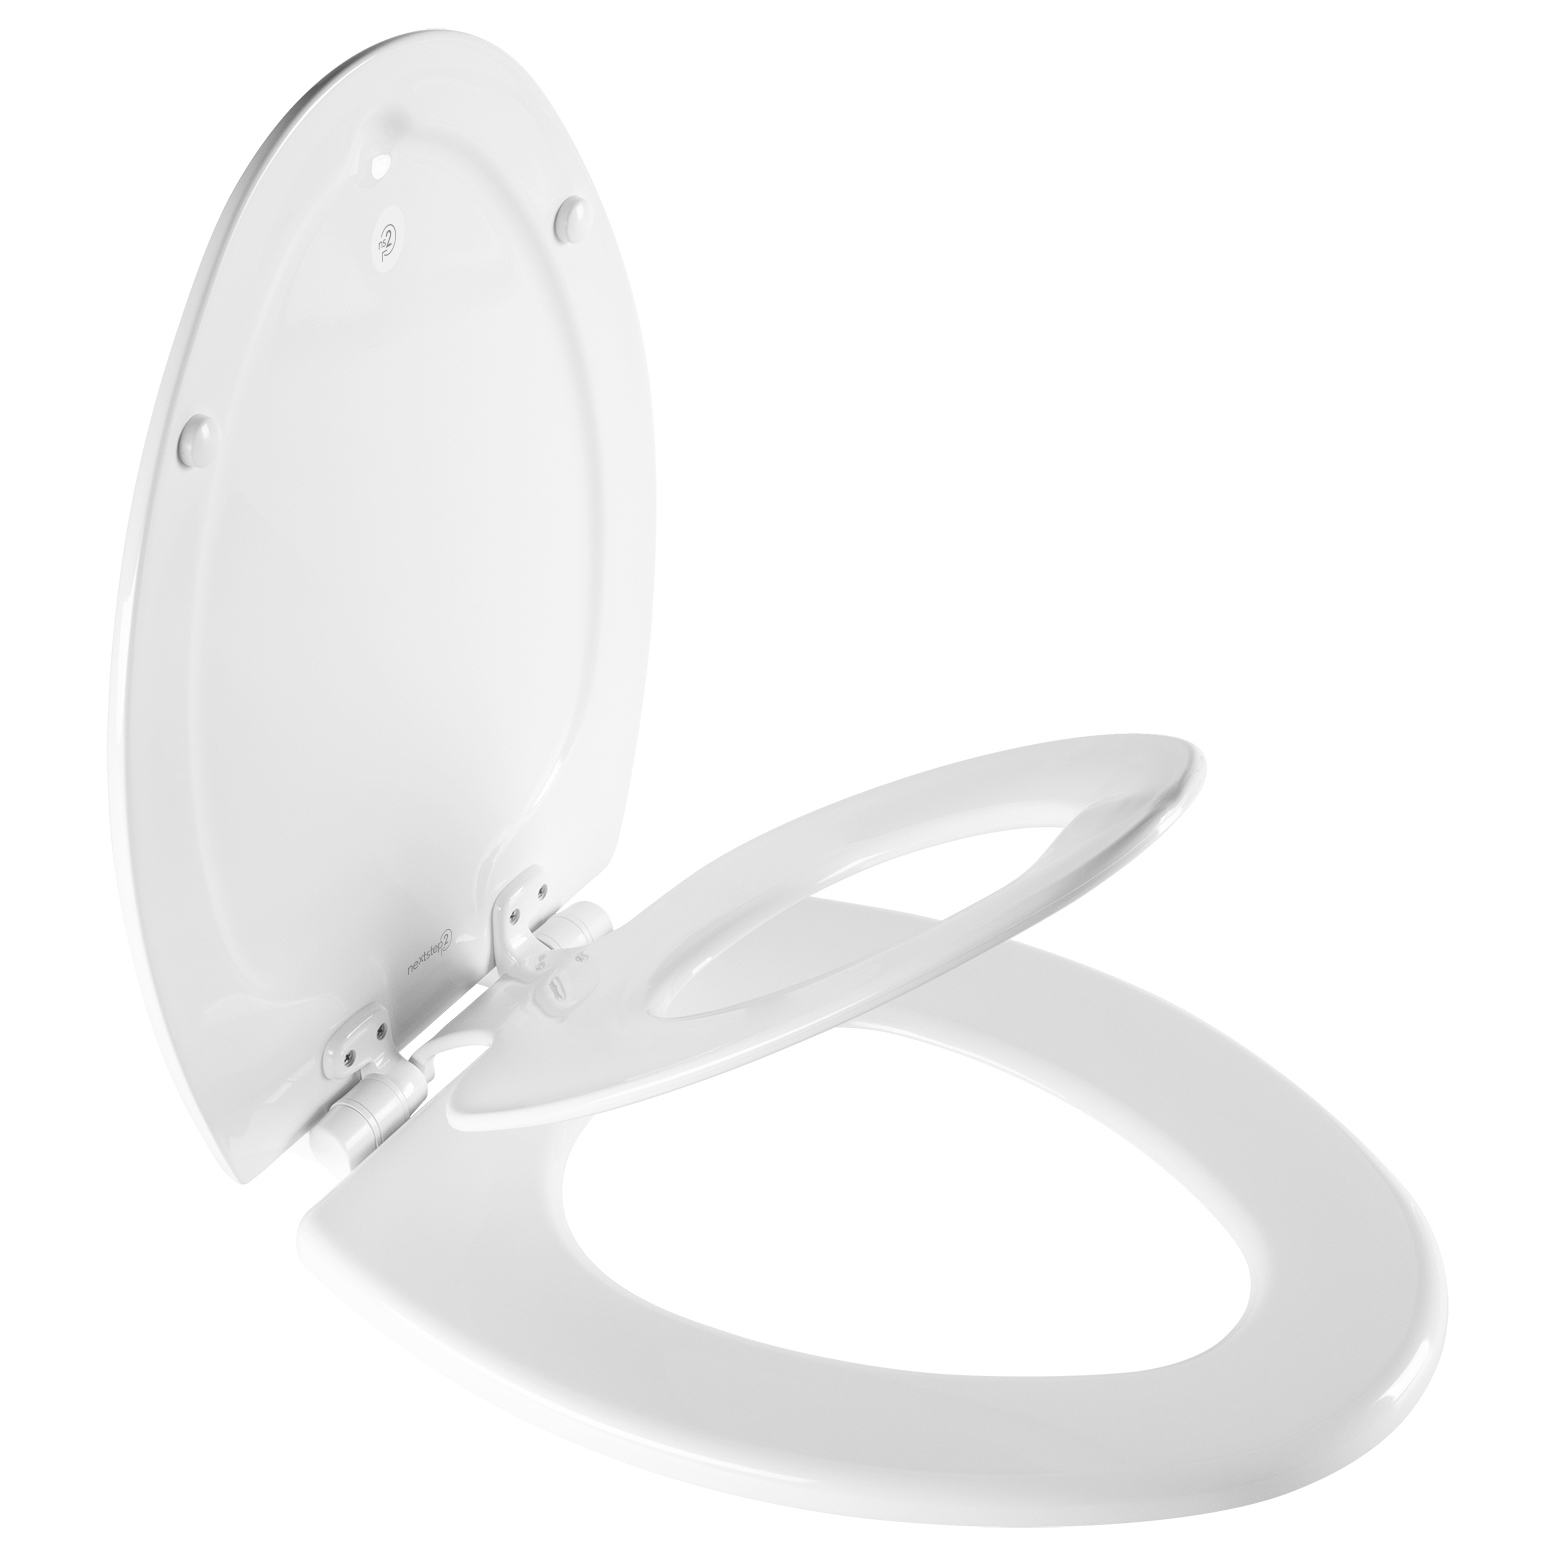 NextStep2 Child/Adult Elongated Toilet Seat in White